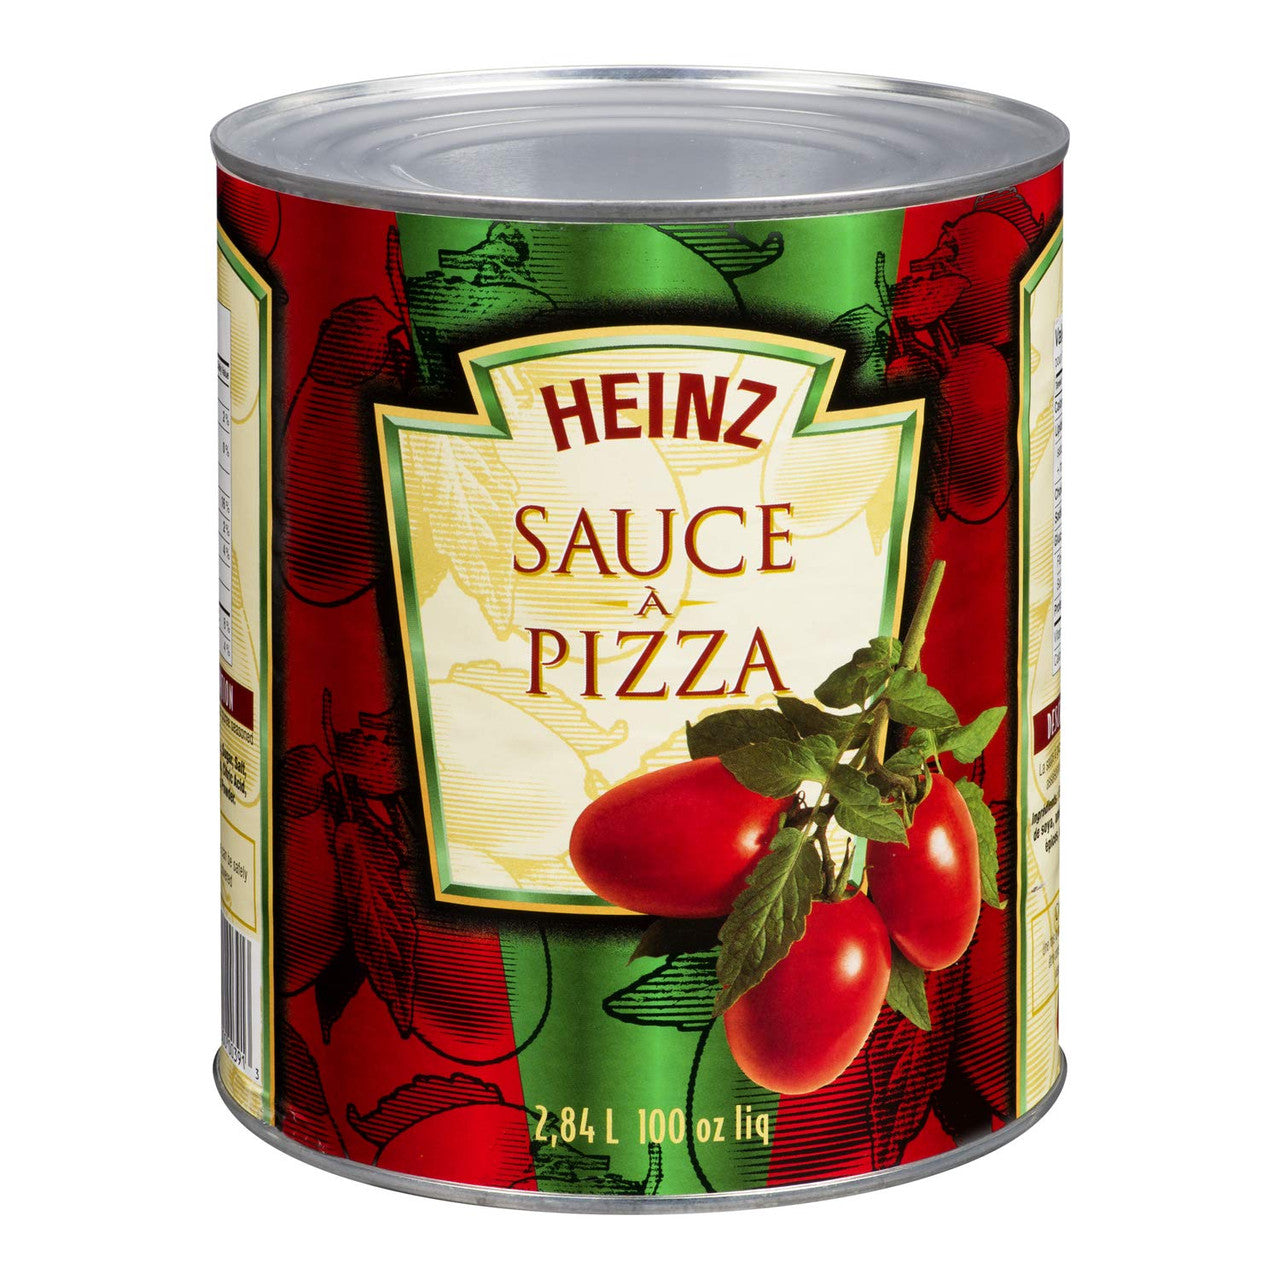 Heinz Pizza Sauce, 2.84L/100 fl. oz., 1 Count, {Imported from Canada}